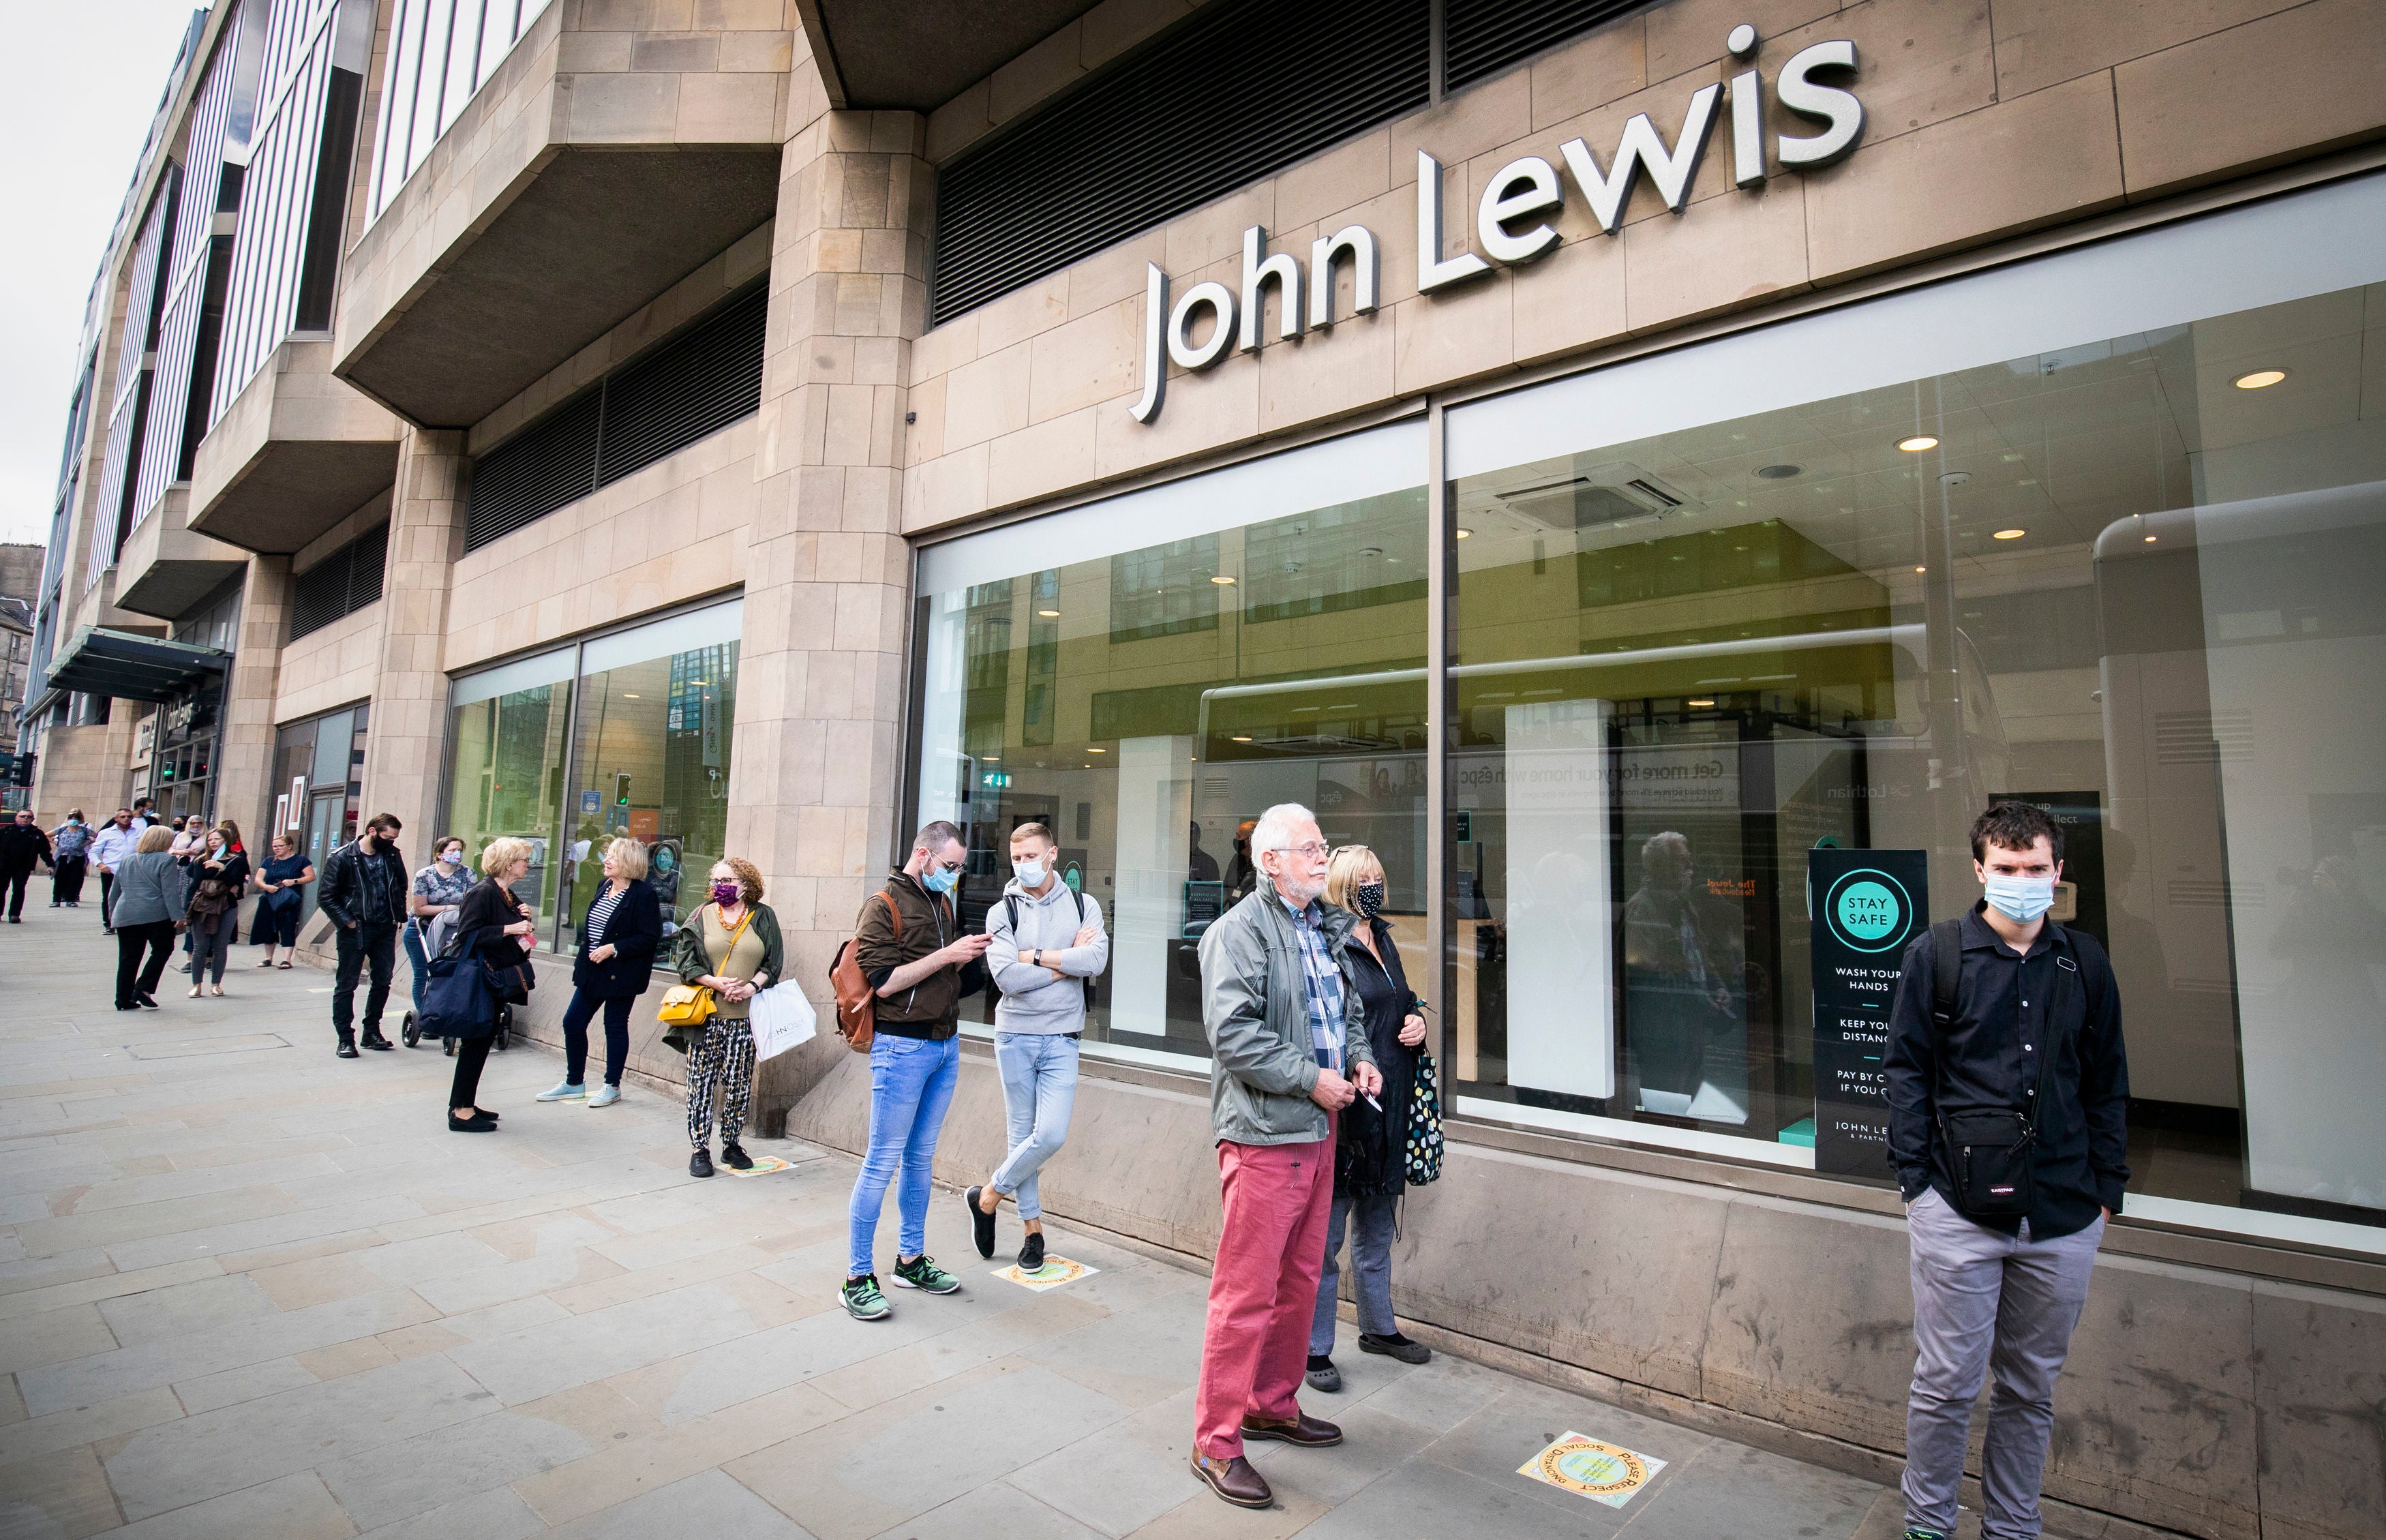 The latest round of closures comes eight months after John Lewis shuttered another eight stores and cut around 1,300 jobs.